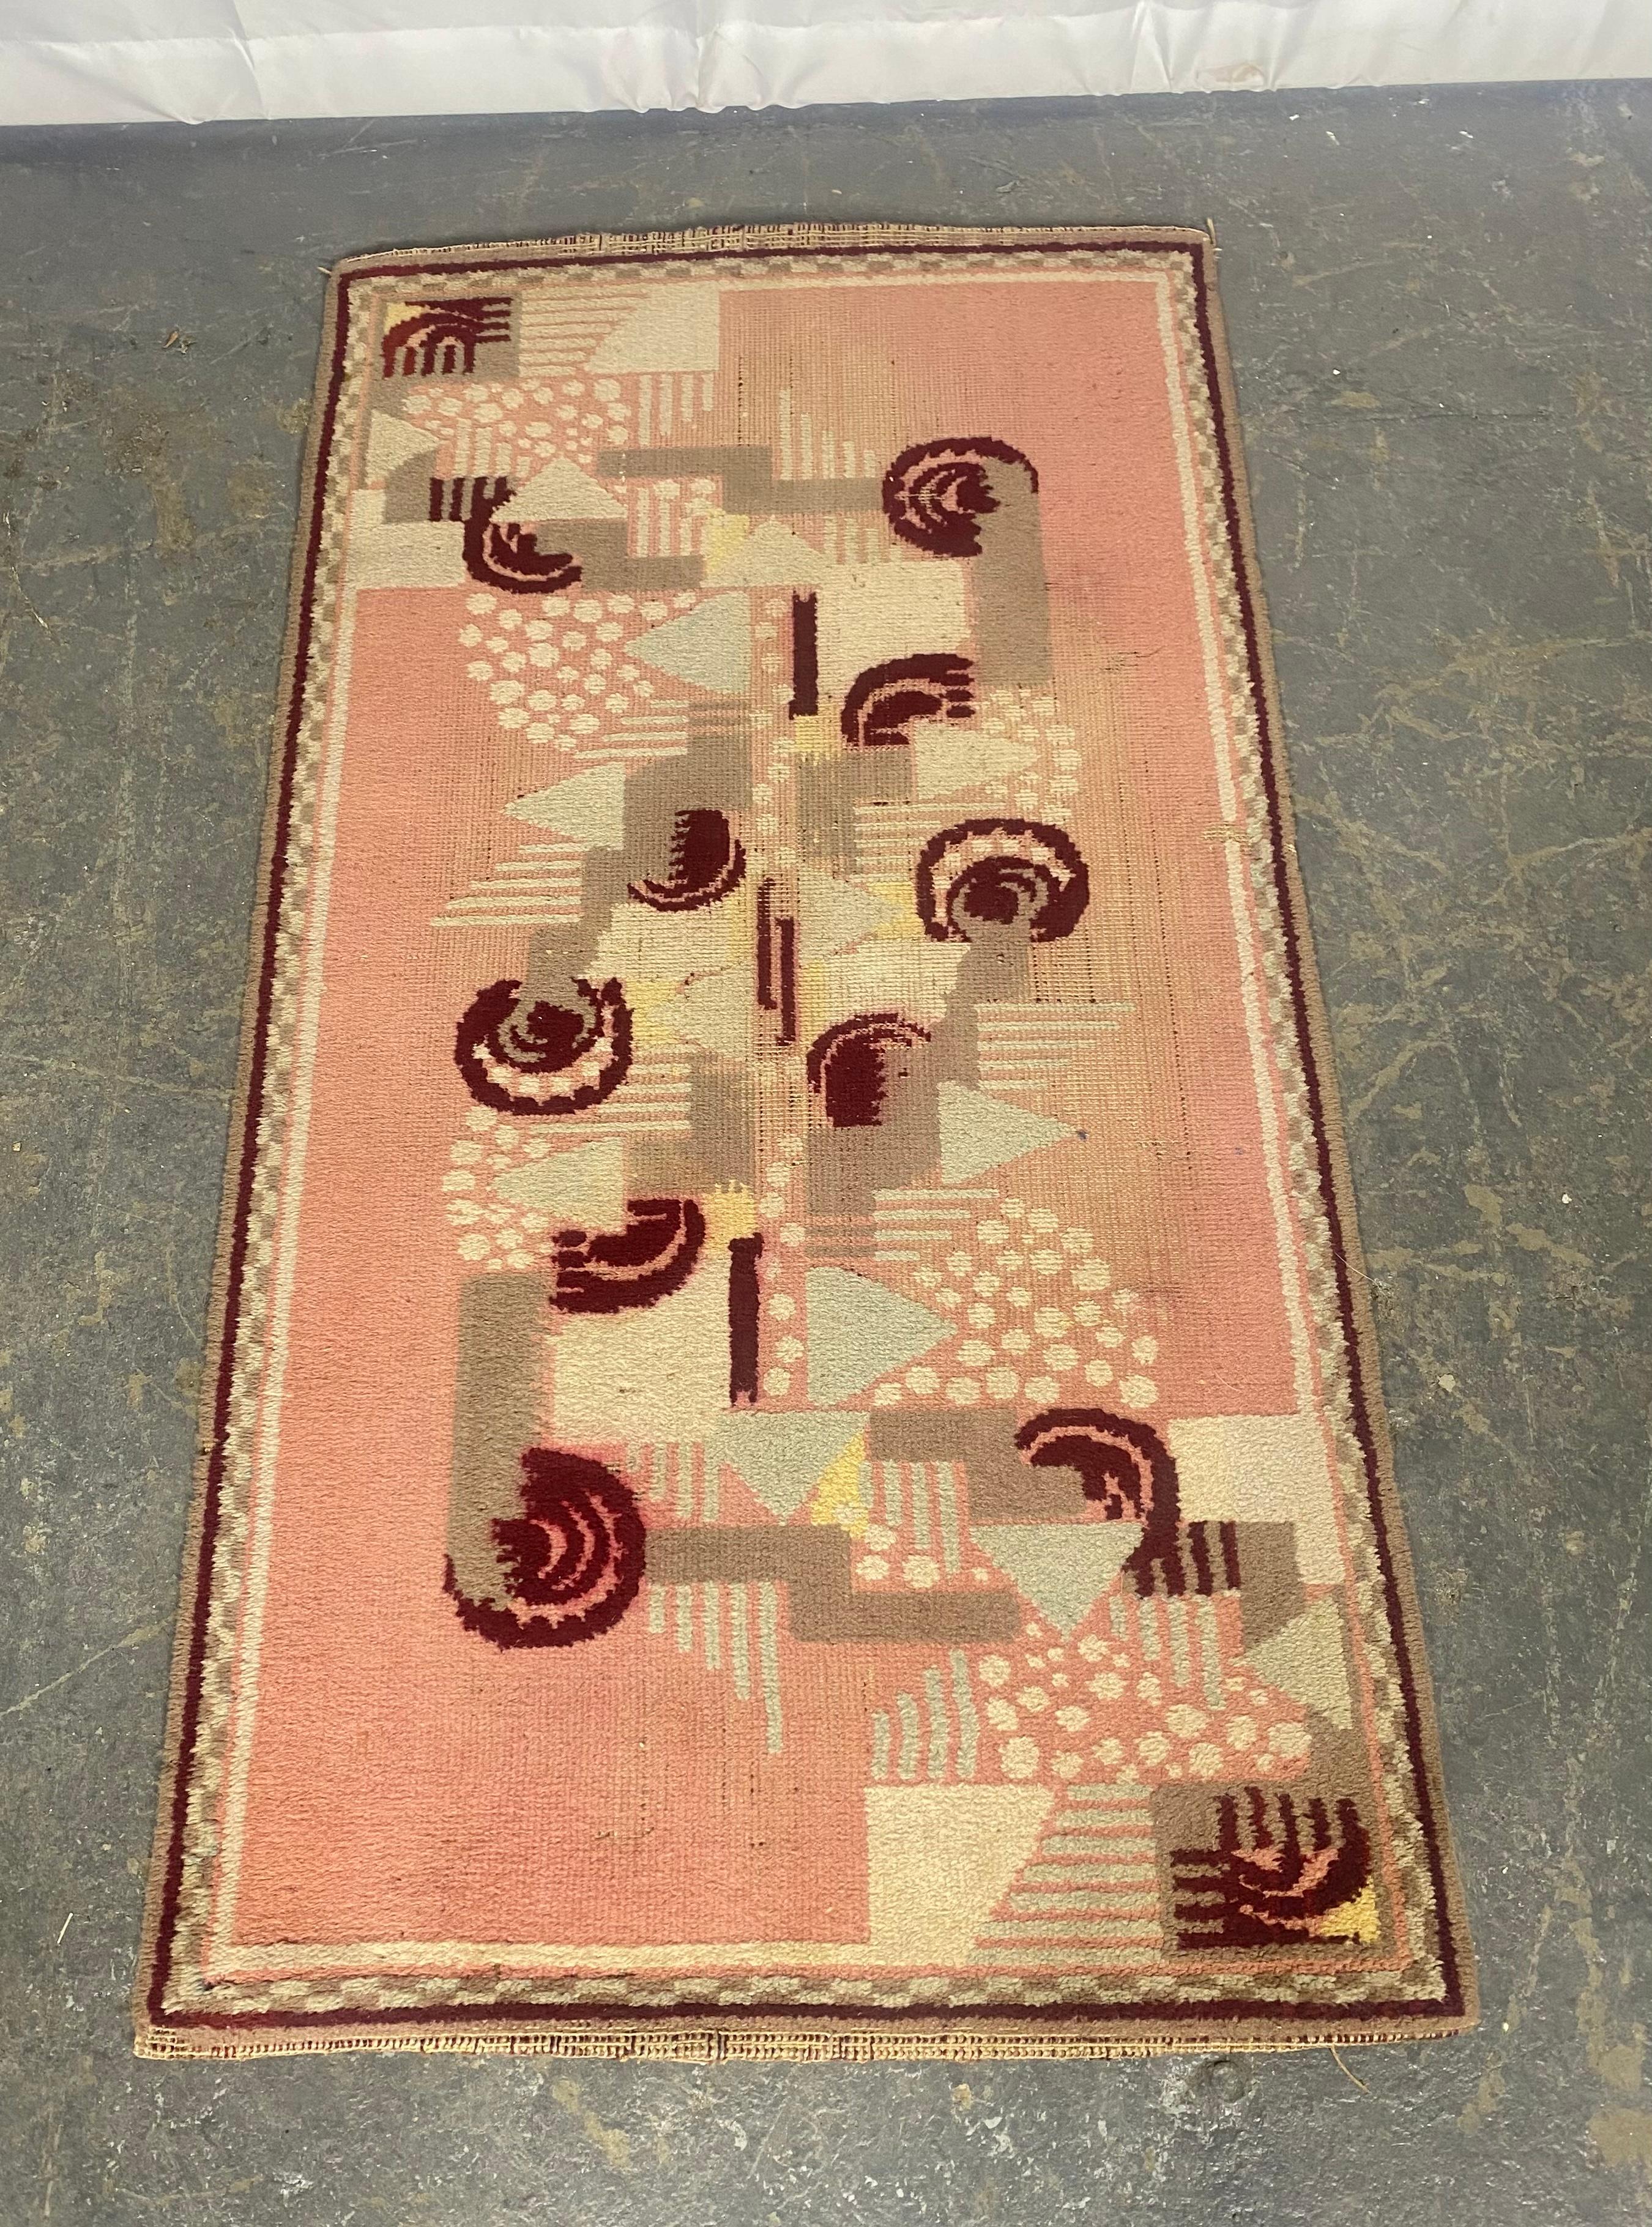 Classic Art Deco Stylized Throw Rug / wall hanging after Donald Deskey For Sale 1